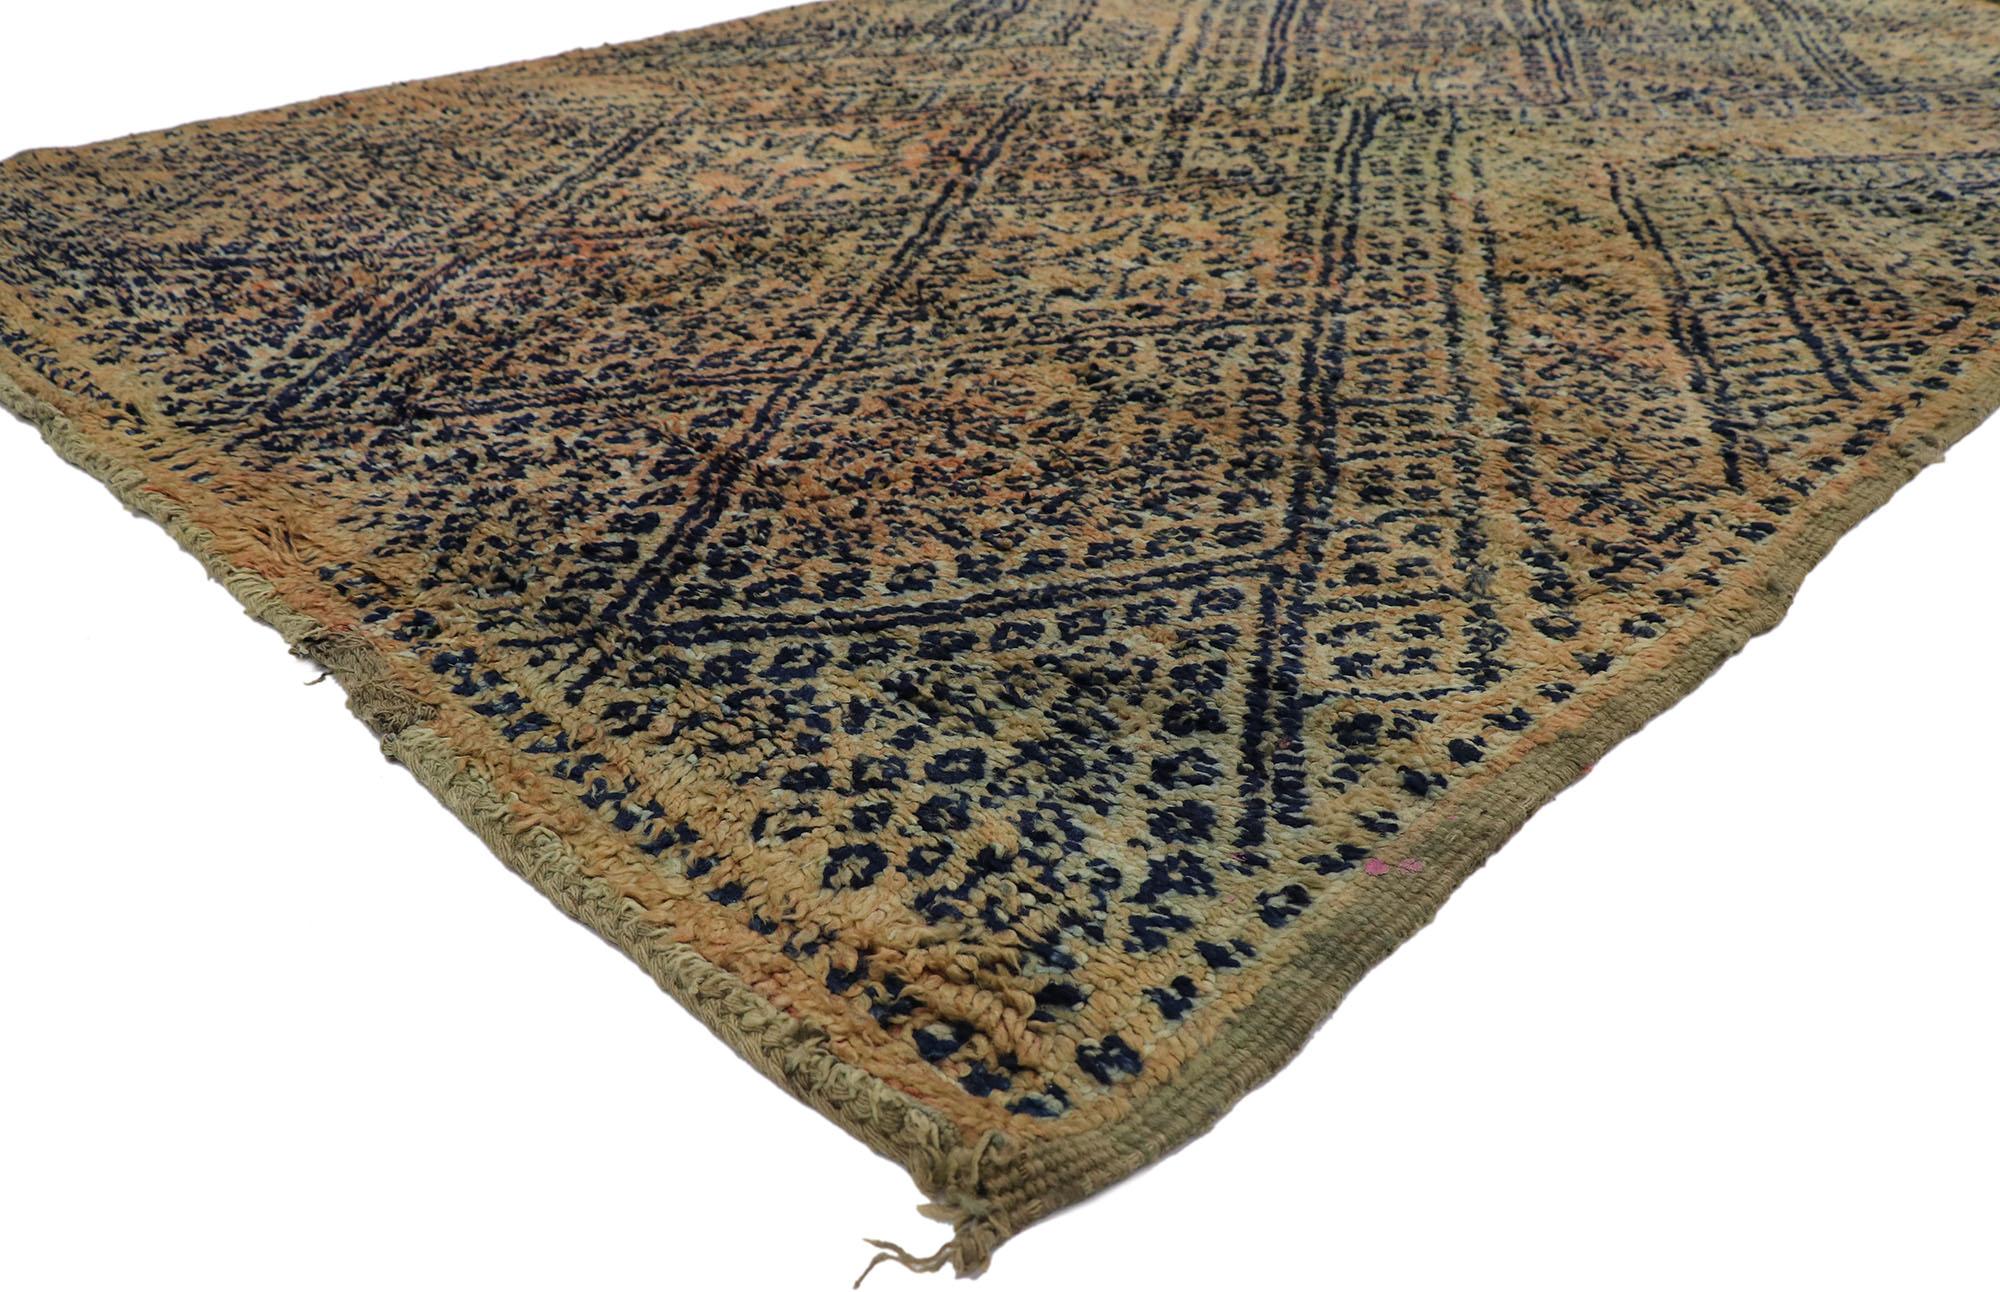 21299 Vintage Beni MGuild Moroccan rug, 06'11 x 10'07. With its nomadic charm, plush pile, incredible detail and texture, this hand knotted wool vintage Beni MGuild Moroccan rug is a captivating vision of woven beauty. The eye-catching diamond